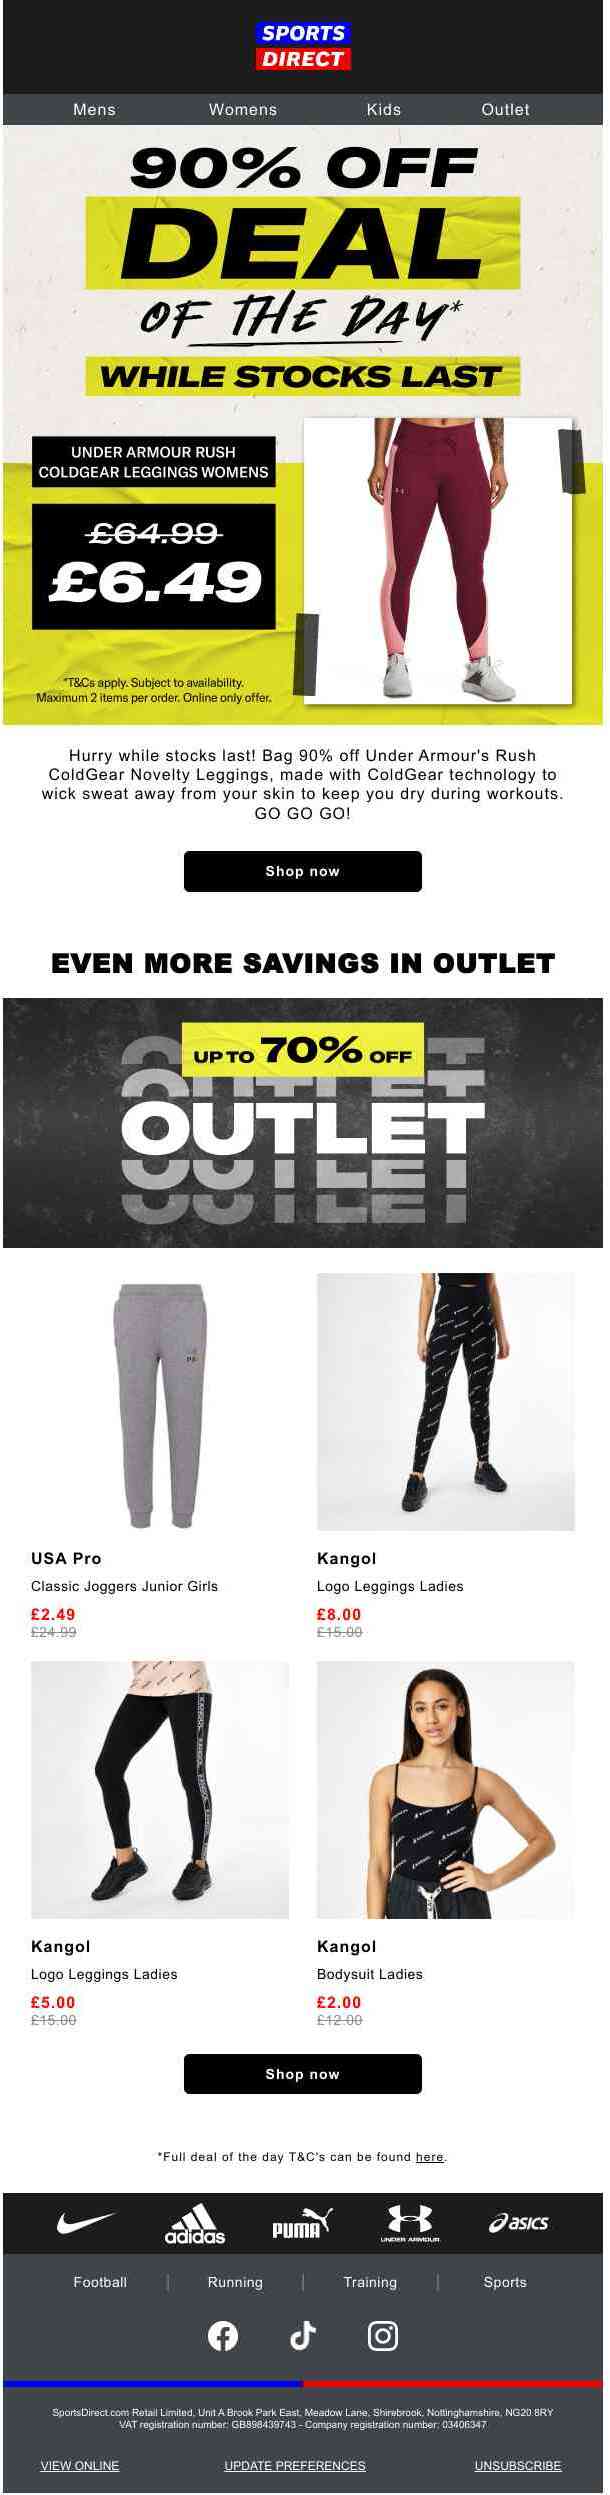 THIS JUST IN: 90% OFF UNDER ARMOUR DEAL 💥